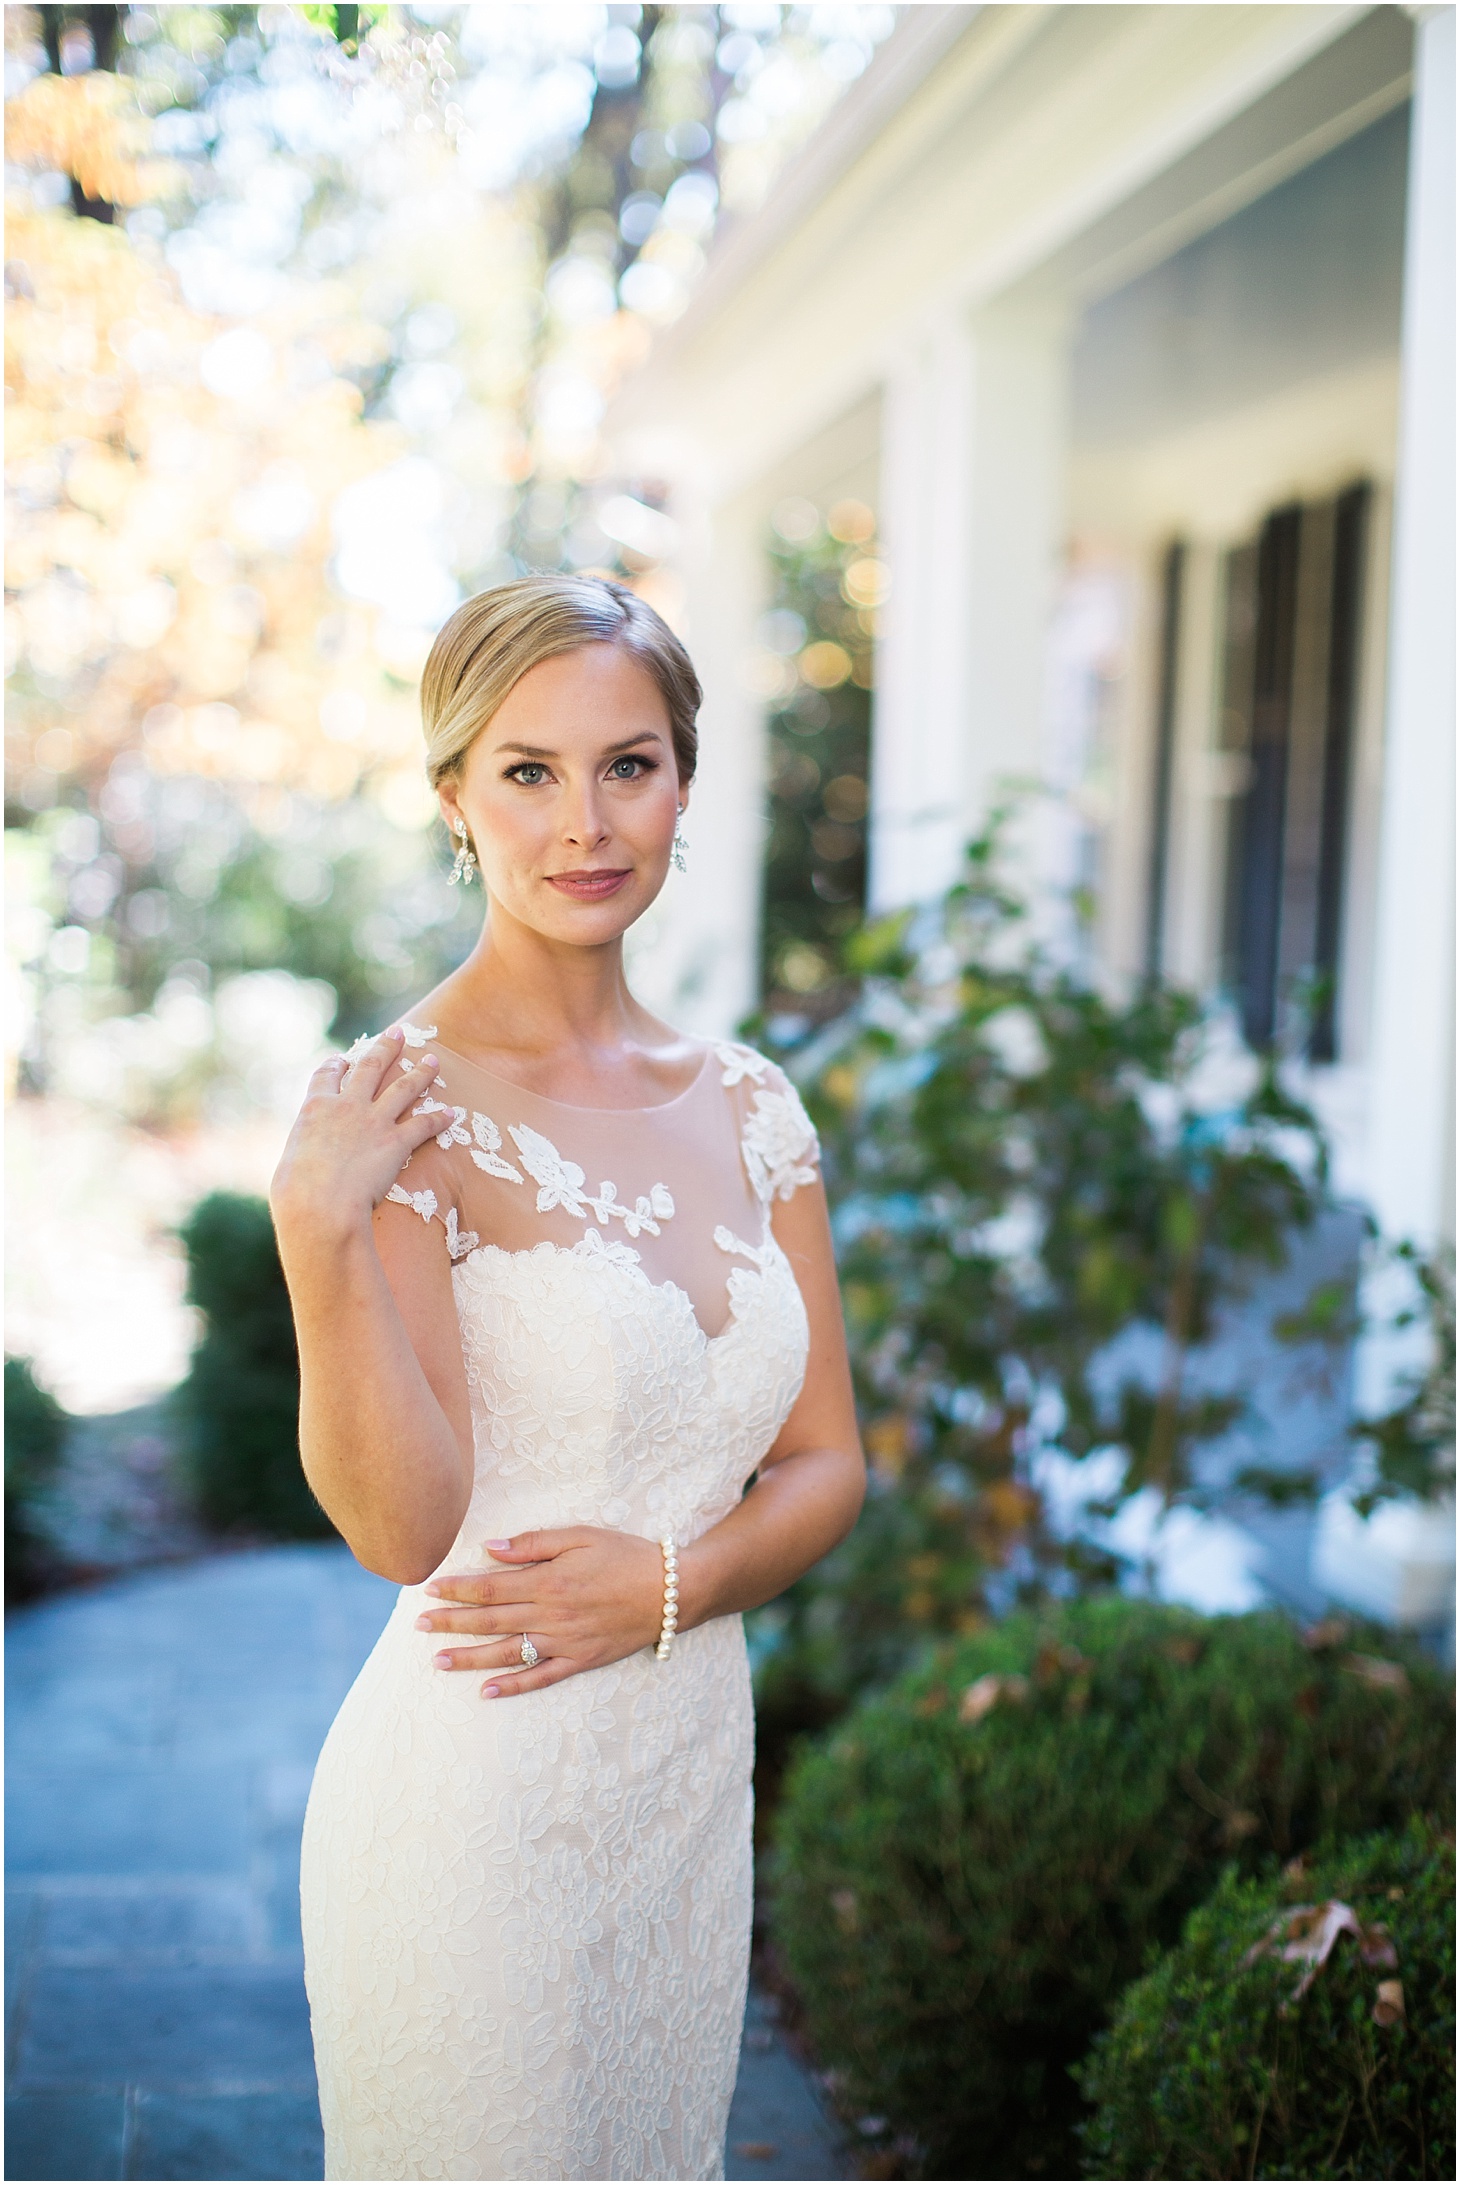 Bridal Portrait in Romona Keveza Gown | Wedding Ceremony at Old Presbyterian Meeting House | Southern Black Tie wedding at St. Regis DC in Dusty Blue and Ivory | Sarah Bradshaw Photography